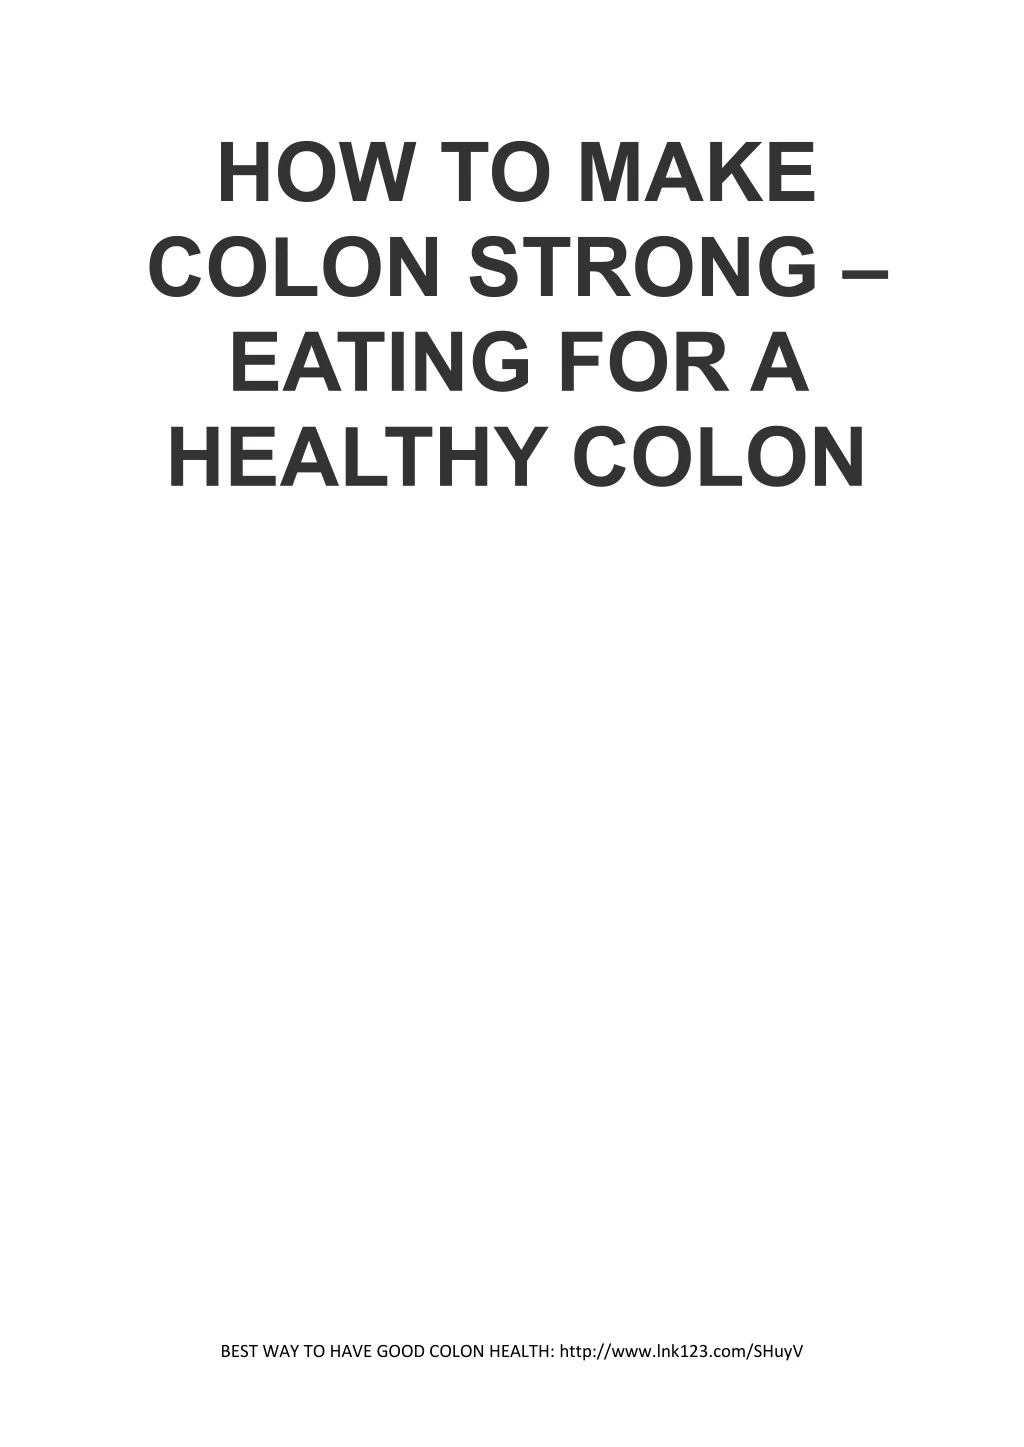 how to make colon strong eating for a healthy